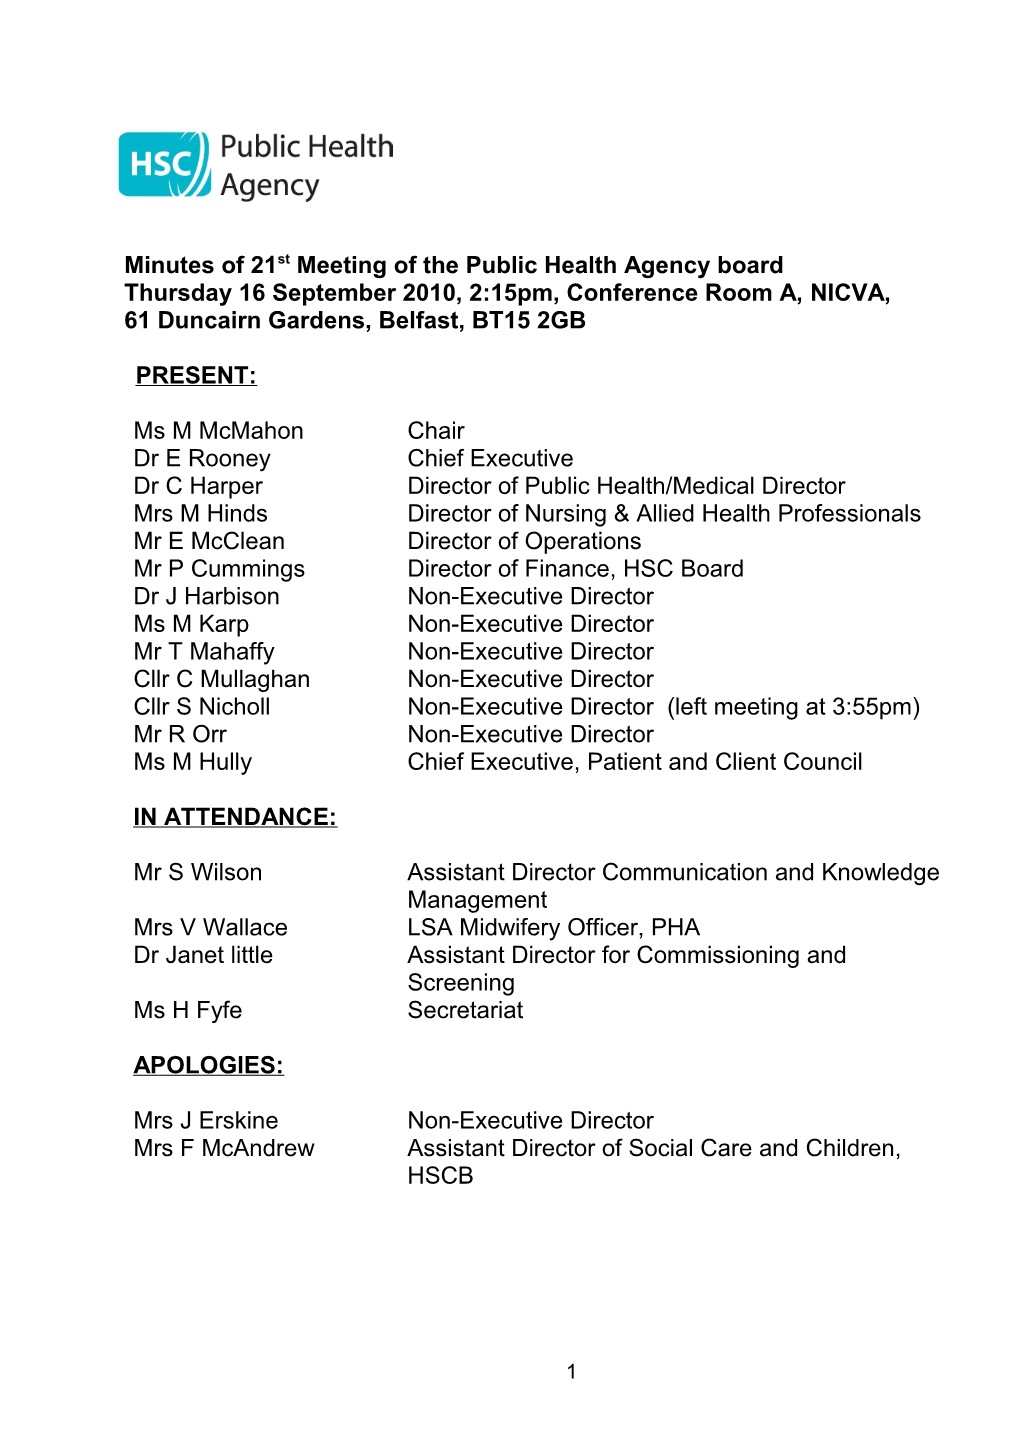 Minutes of 21Stmeeting of the Public Health Agency Board